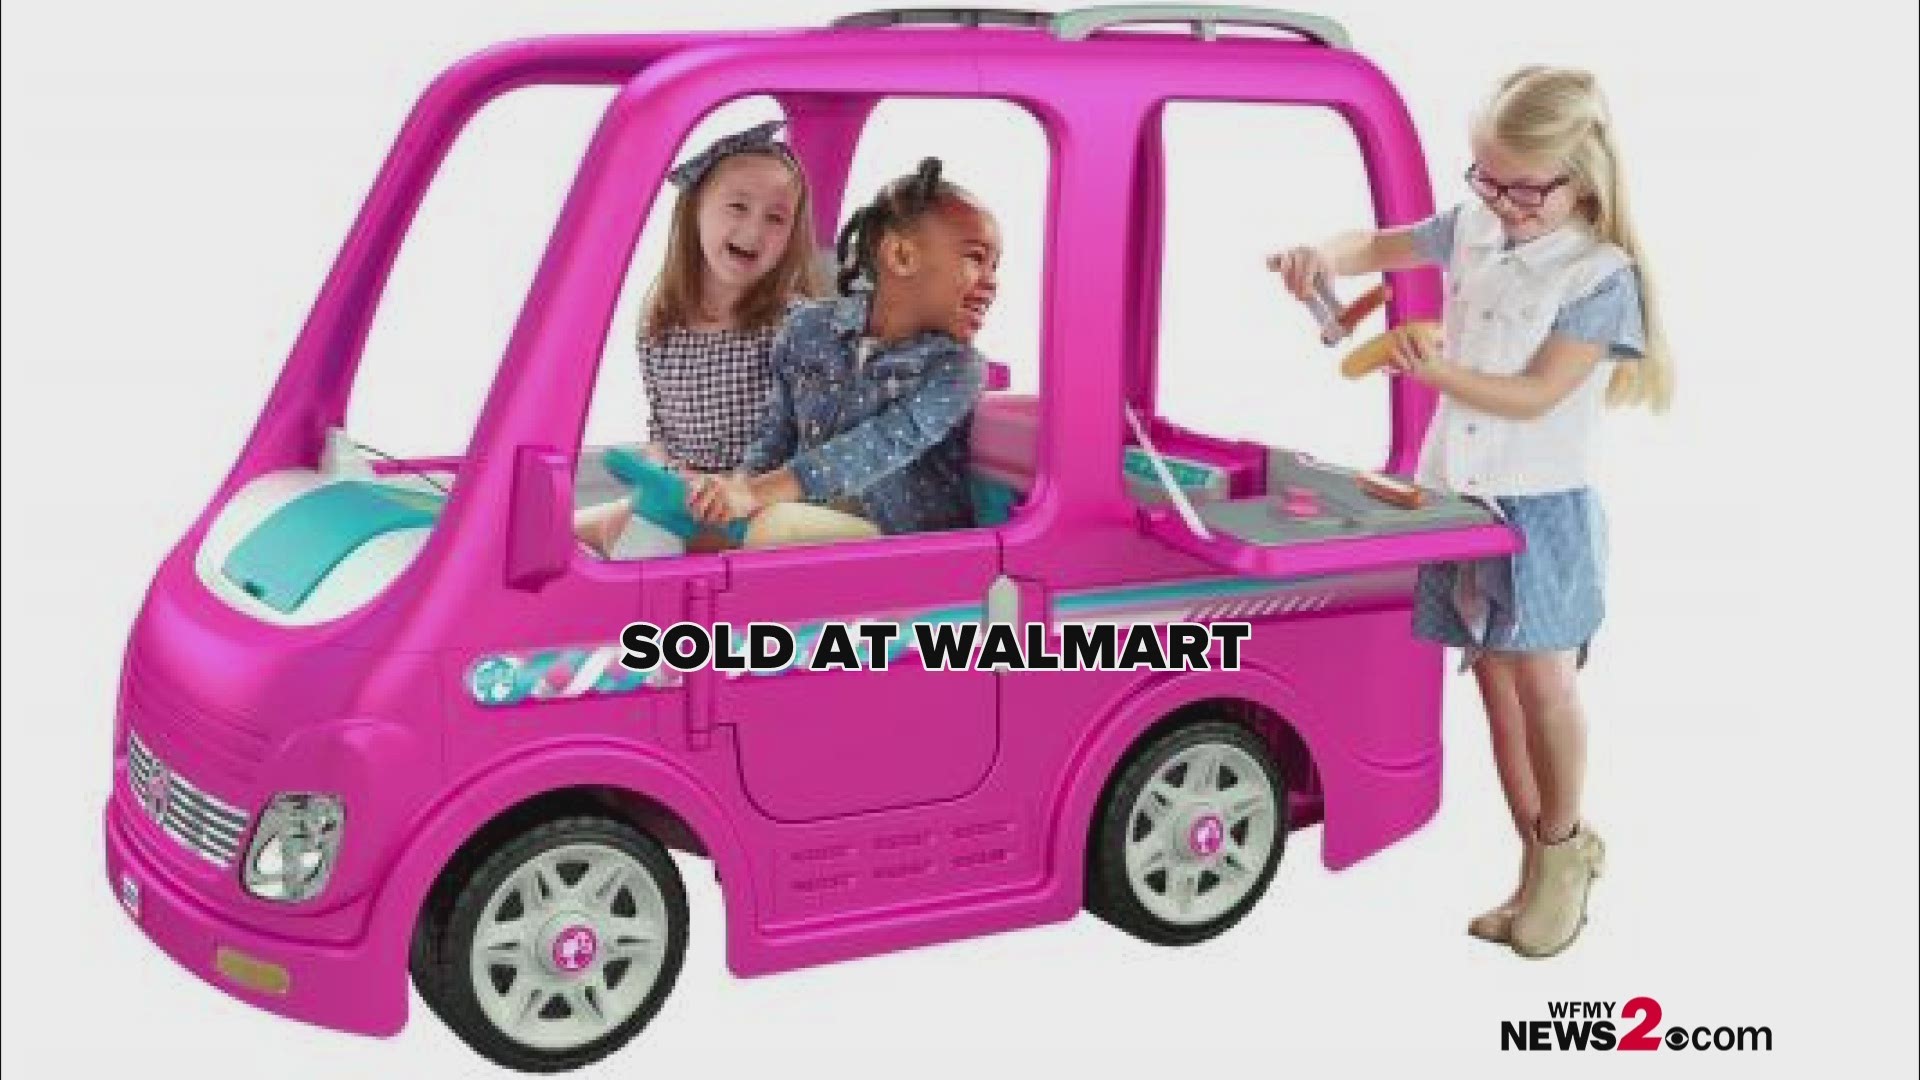 Fisher-Price is recalling 44,000 Children’s Power Wheels Barbie Dream Campers. The Consumer Products Safety Commission (CPSC) said the Power Wheels can continue to run after the foot pedal is released, posing an injury to a child.